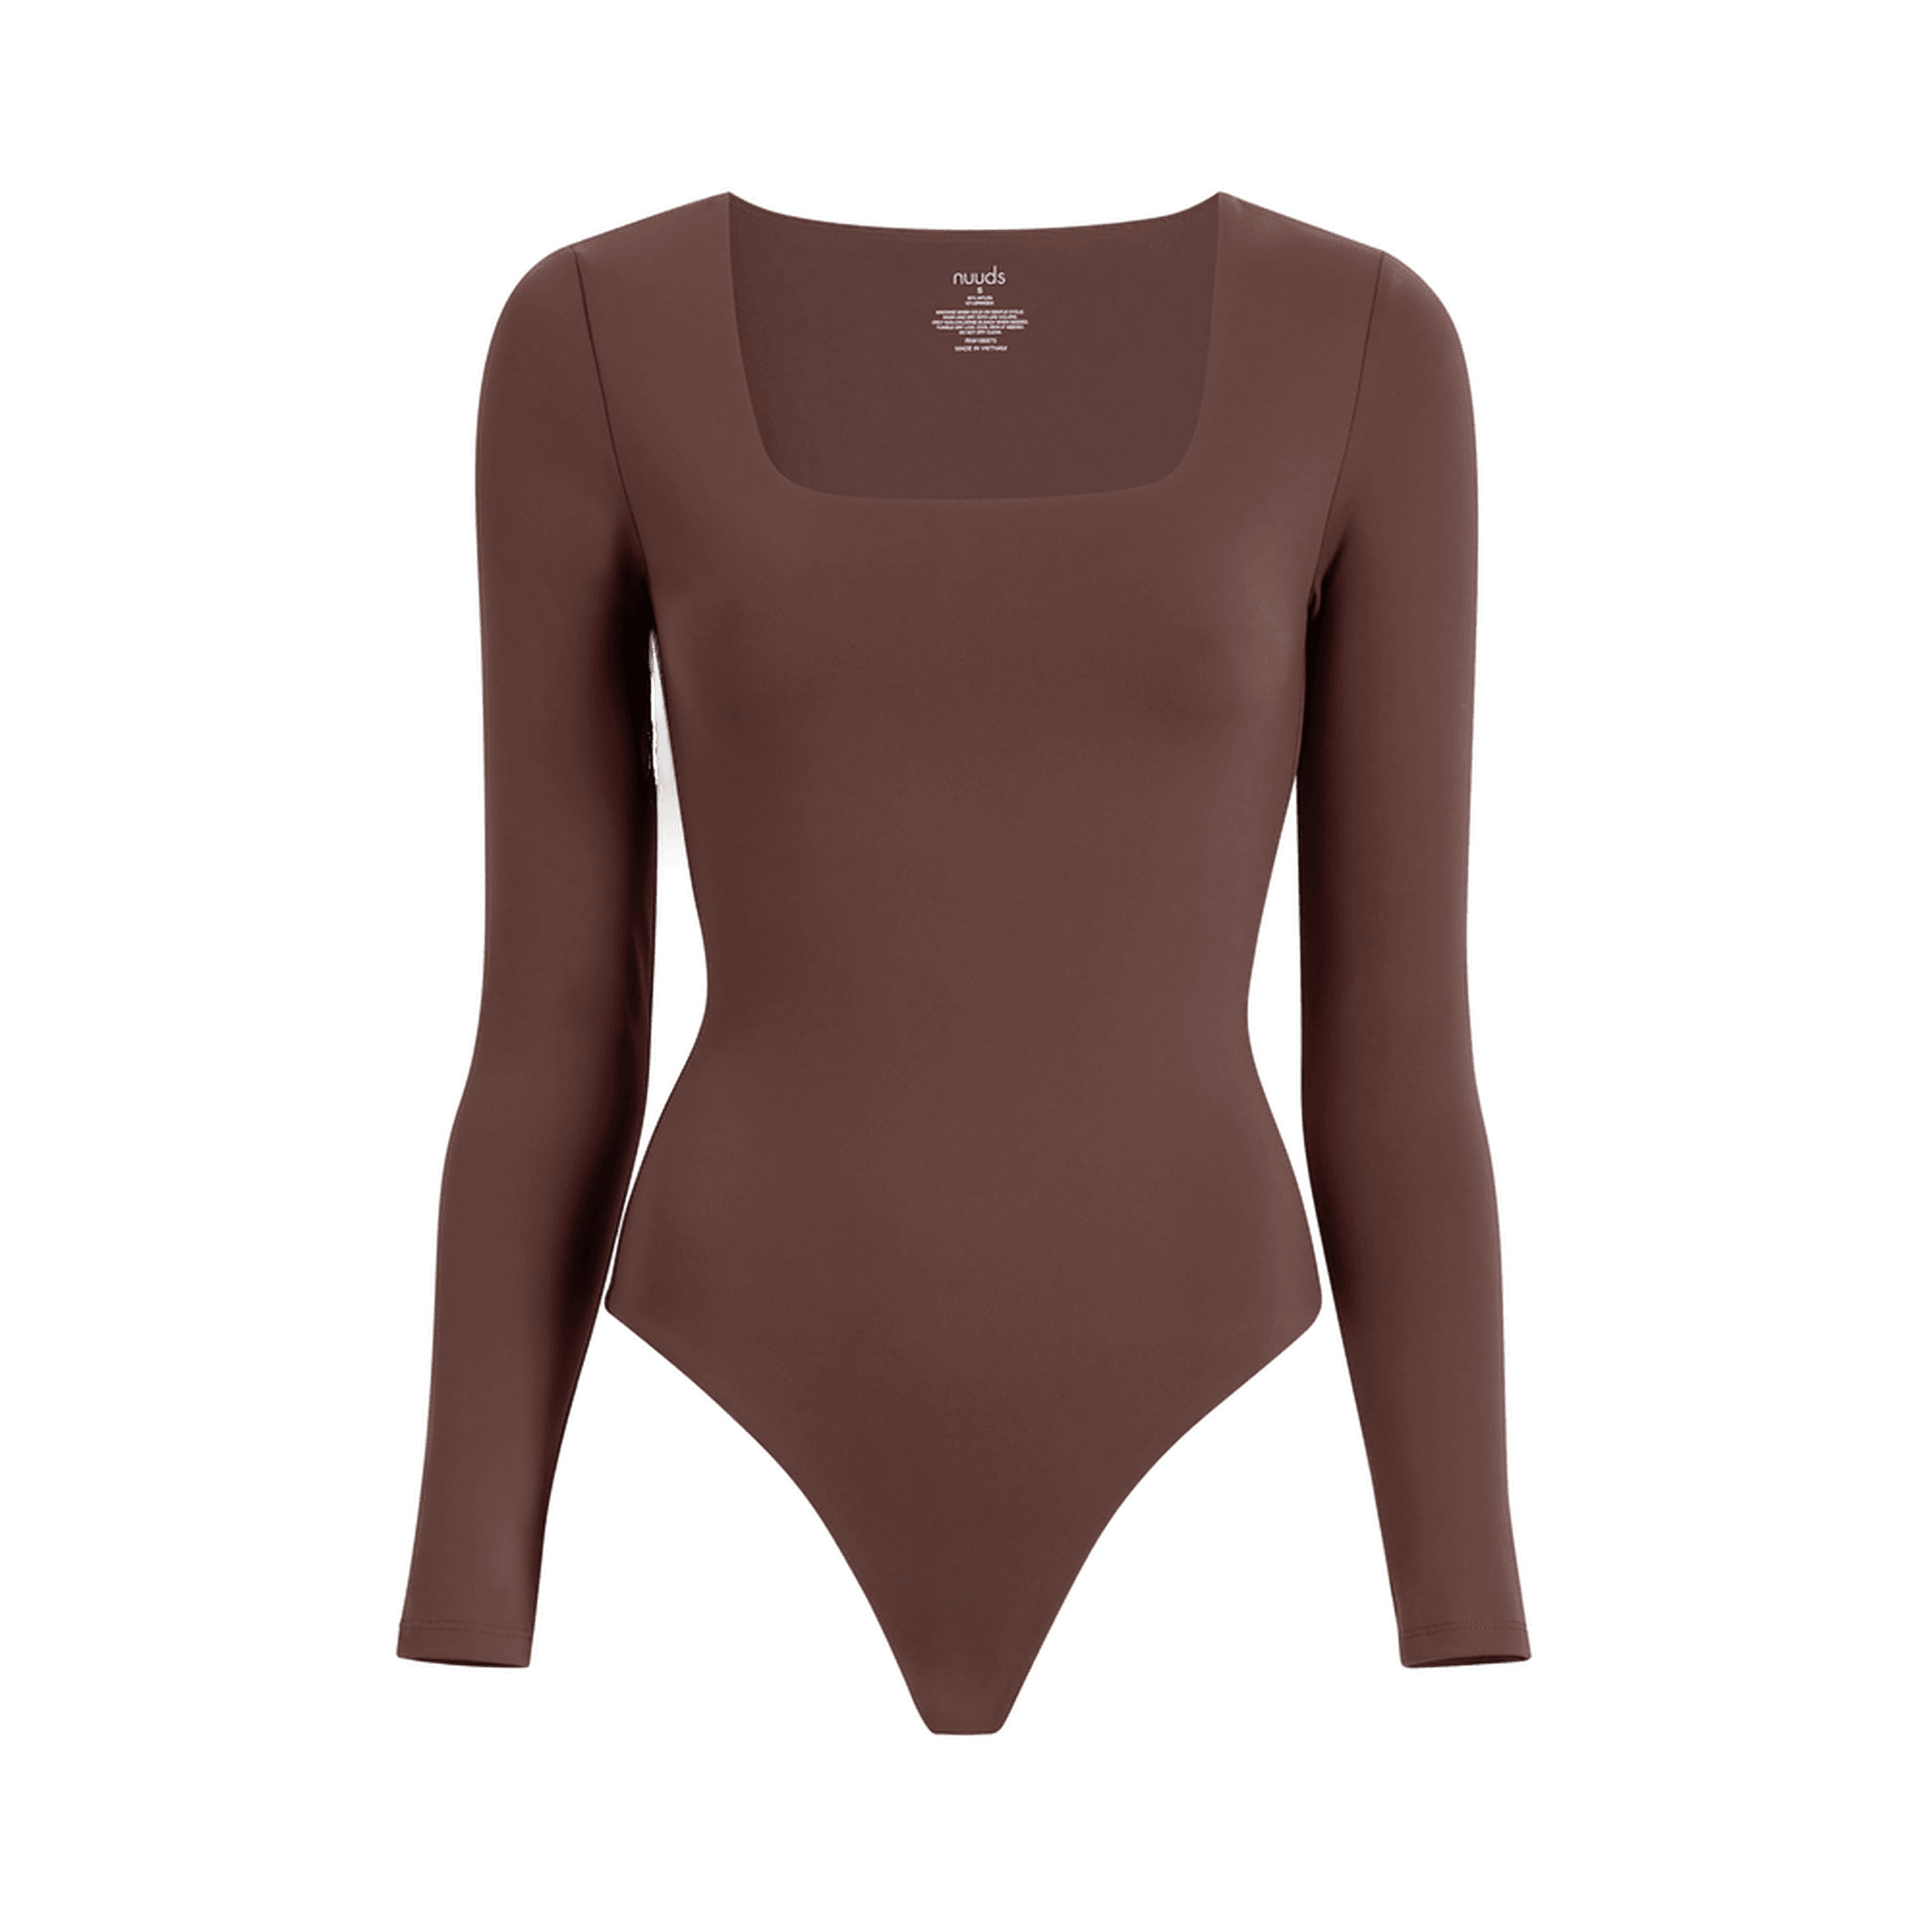 https://cdn.shopify.com/s/files/1/0654/5565/3115/products/NUD157_W-008_BODYSUIT--SQ-NECK-LS_Coffee_Front_Ghost.png?v=1704921193&width=5000